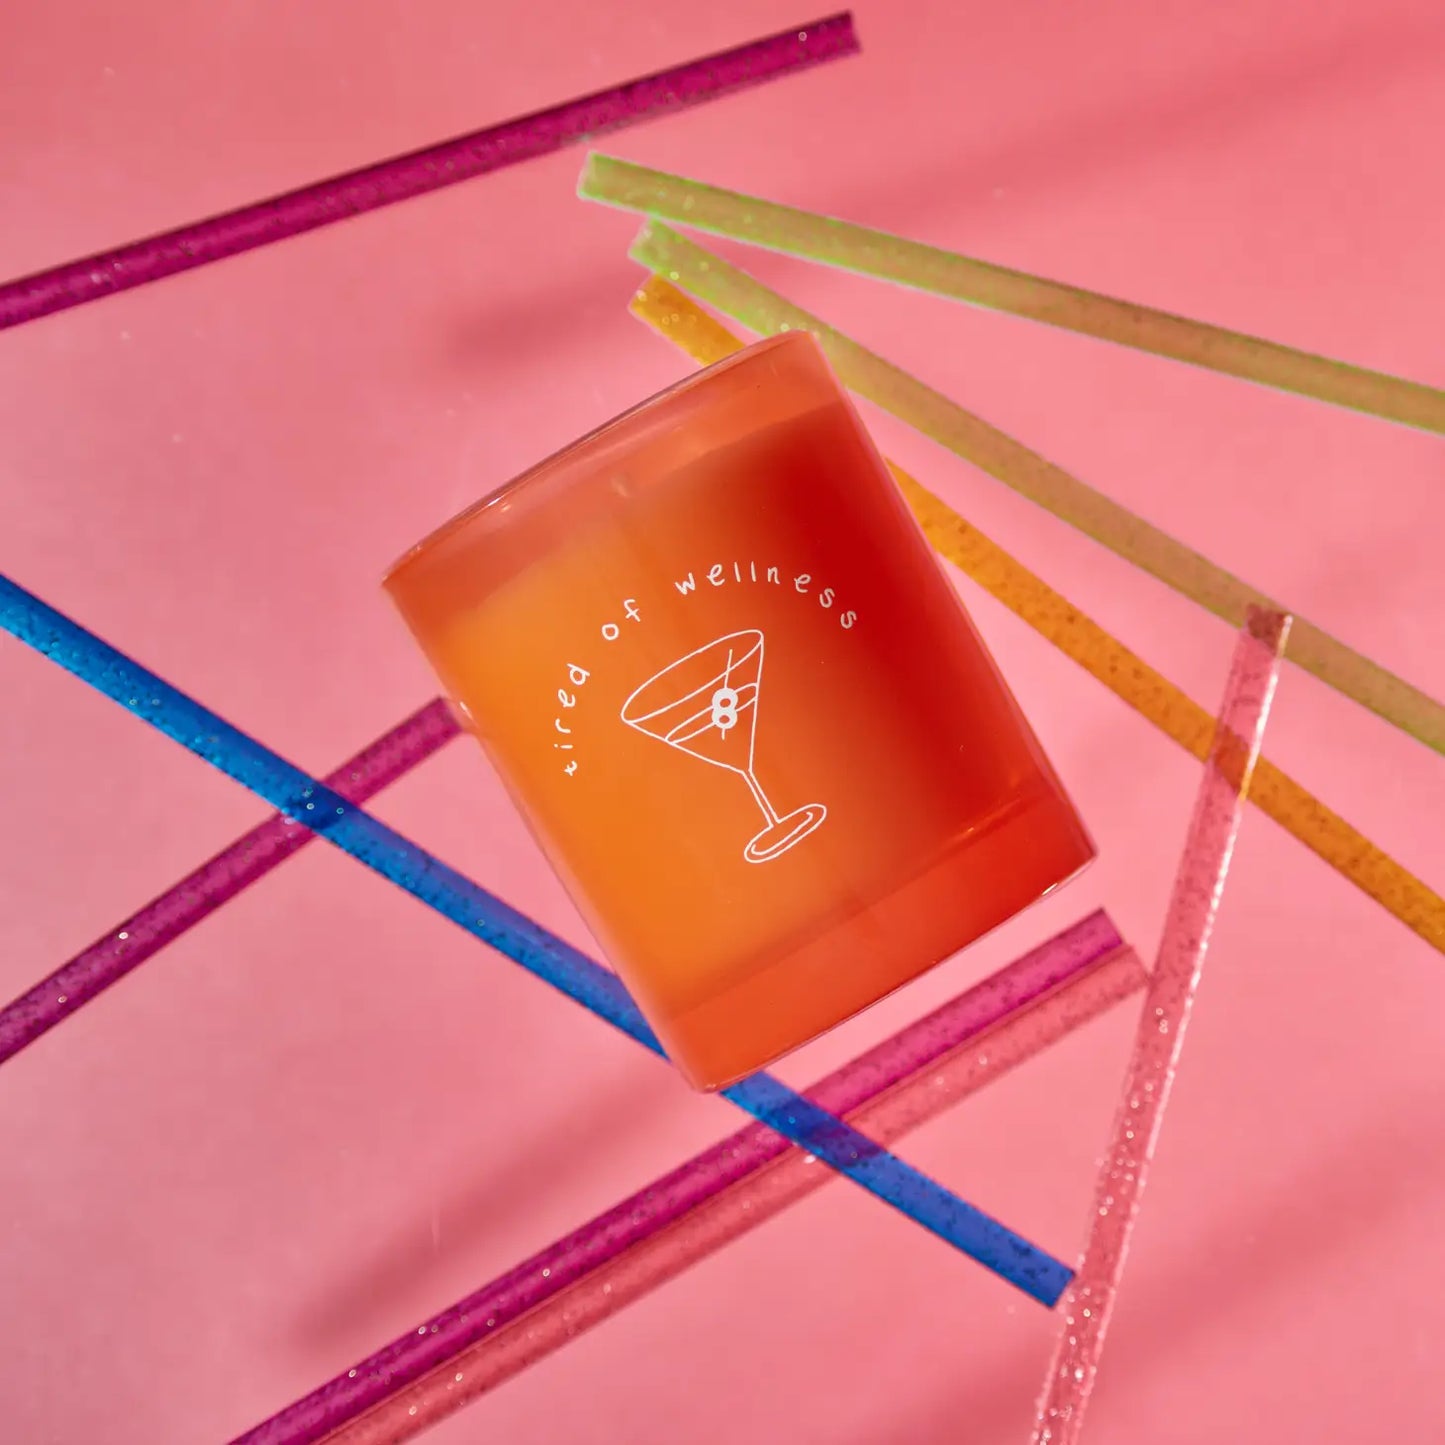 Vibe By Maegen — 'Tired of Wellness' Candle